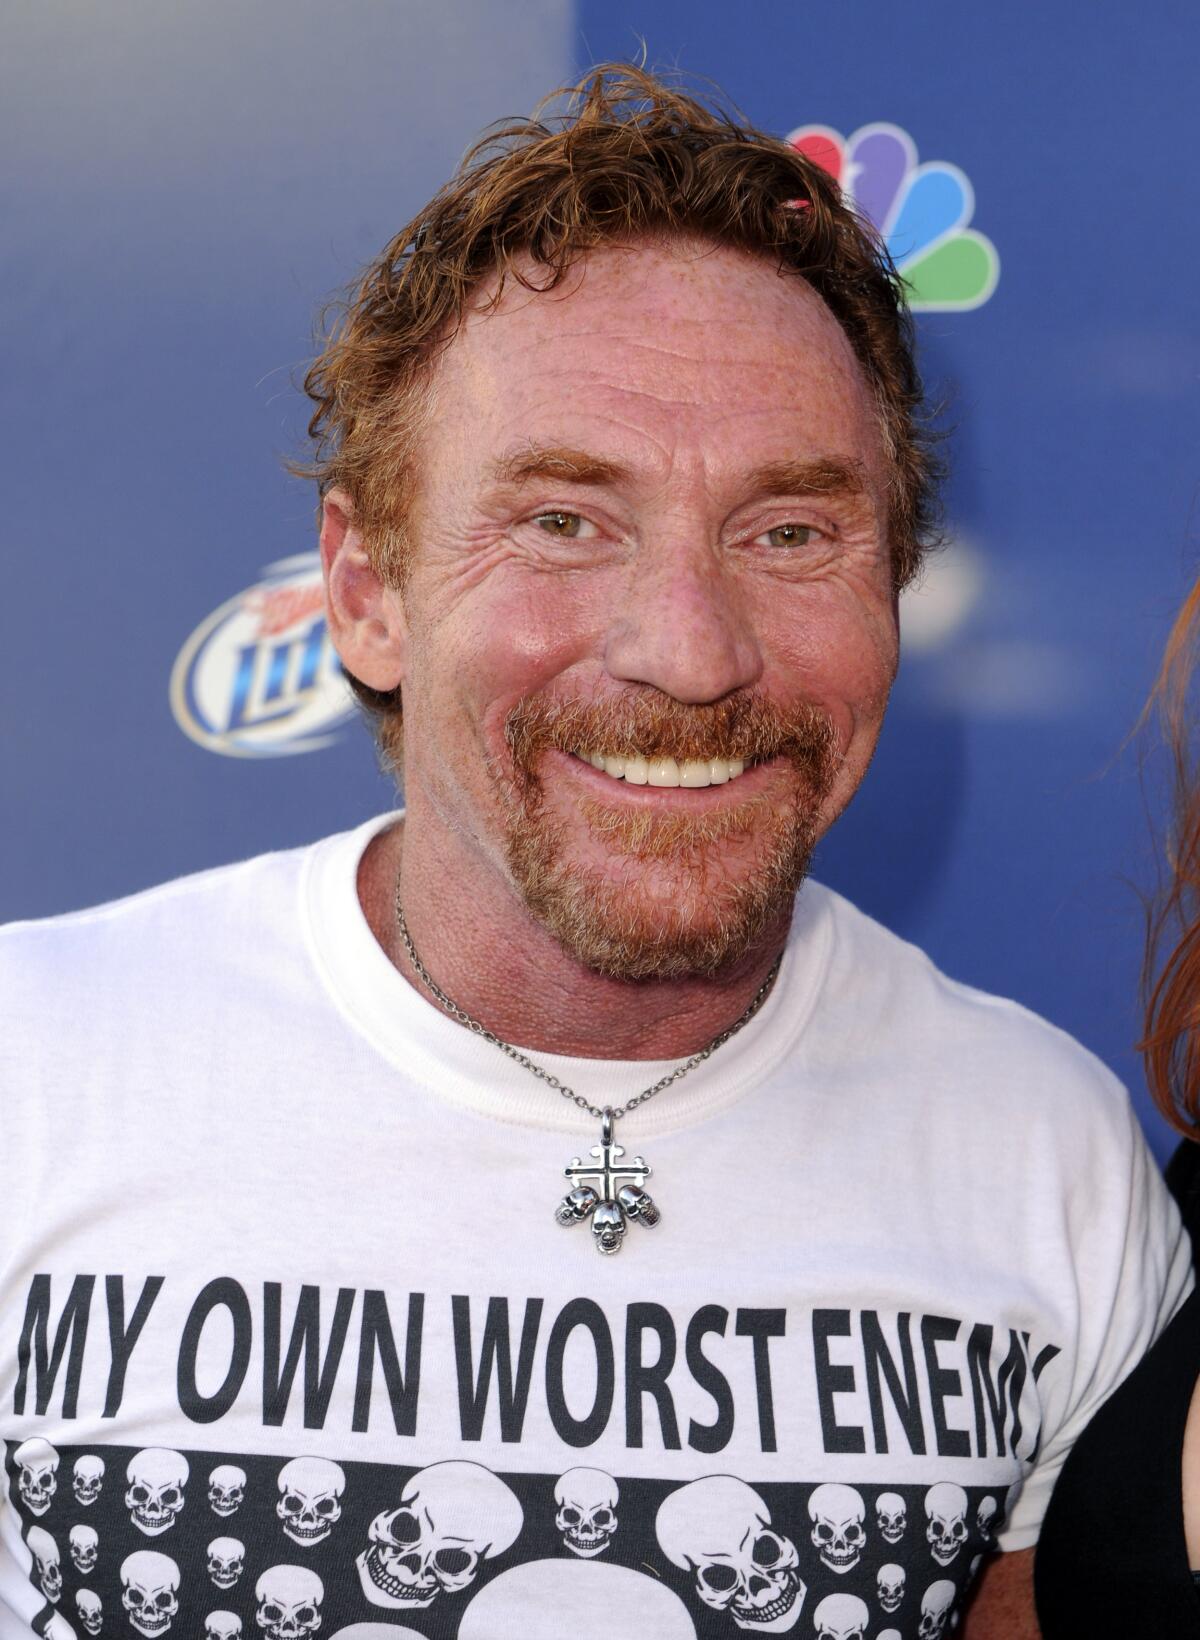 Danny Bonaduce in a white t-shirt that says "My Own Worst Enemy" with skulls and a necklace with a large pendant